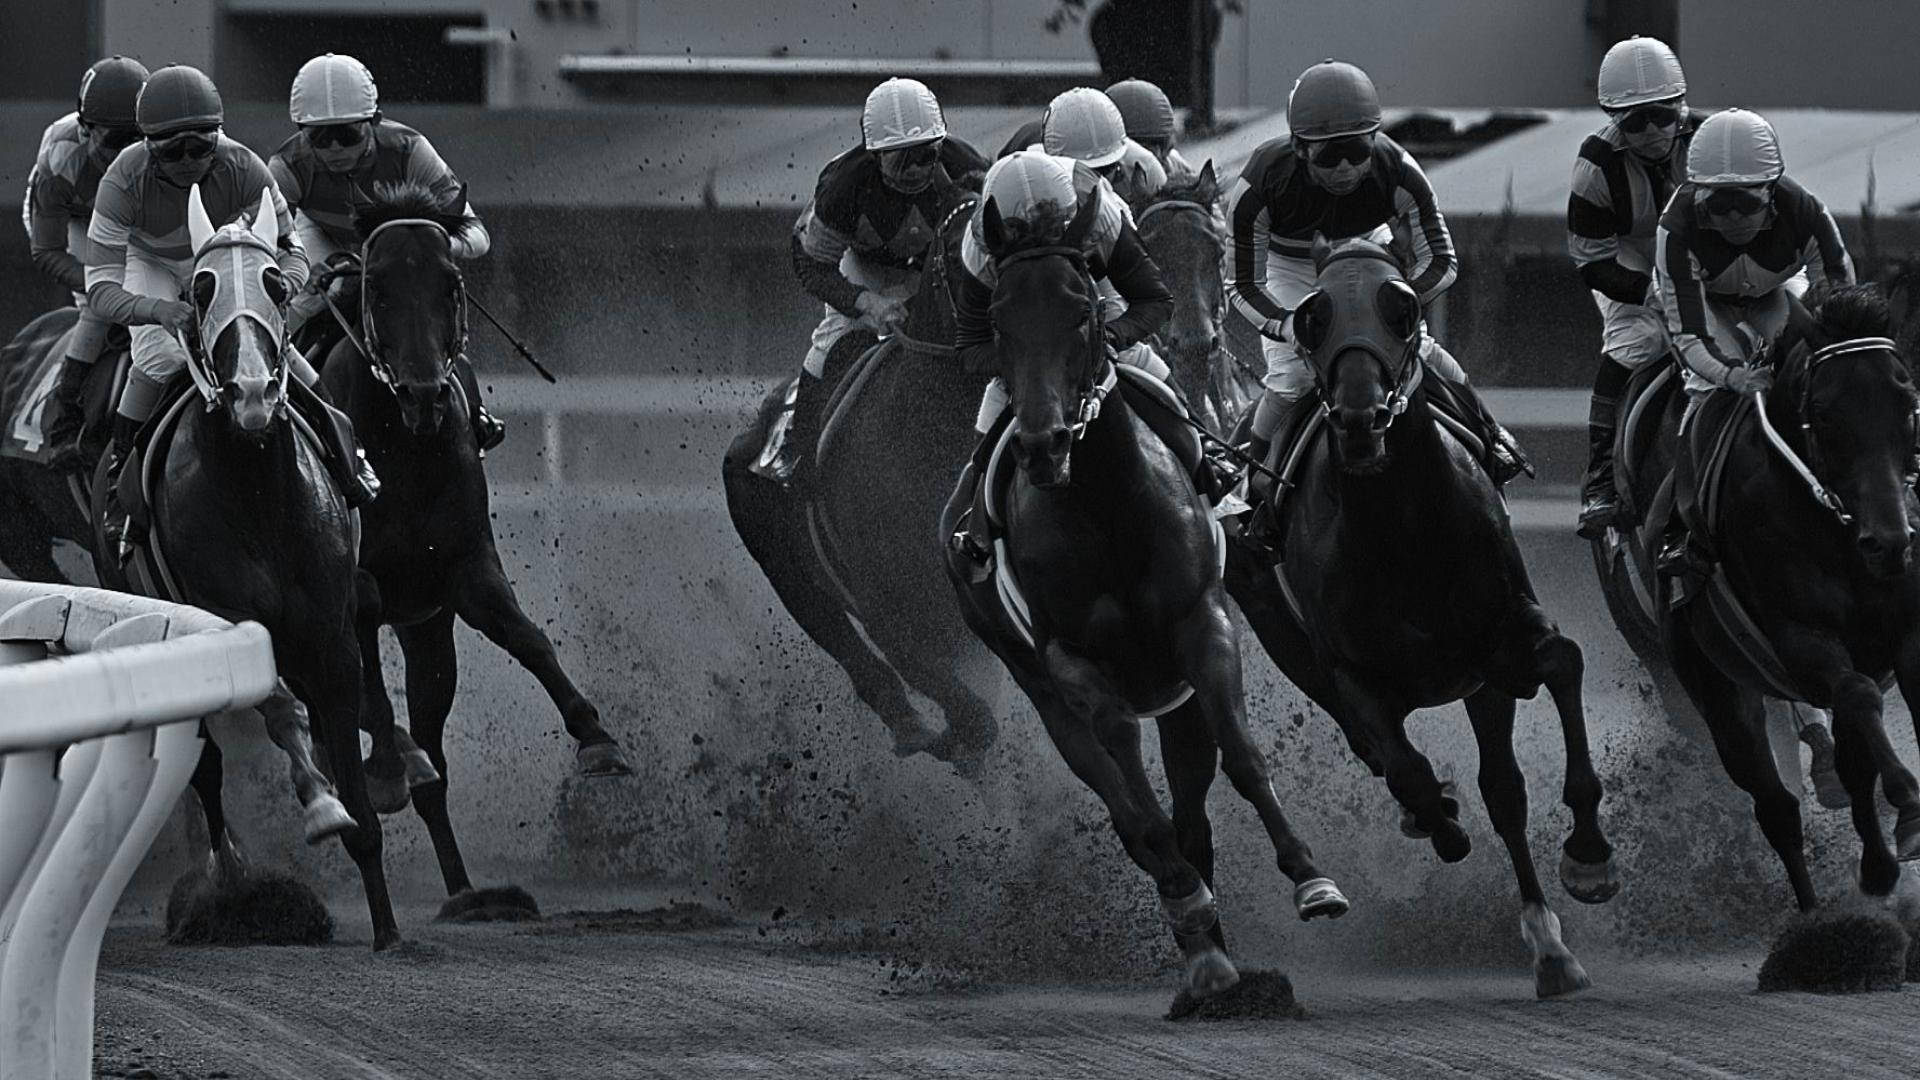 Download Horse Racing In Black And White Wallpaper 